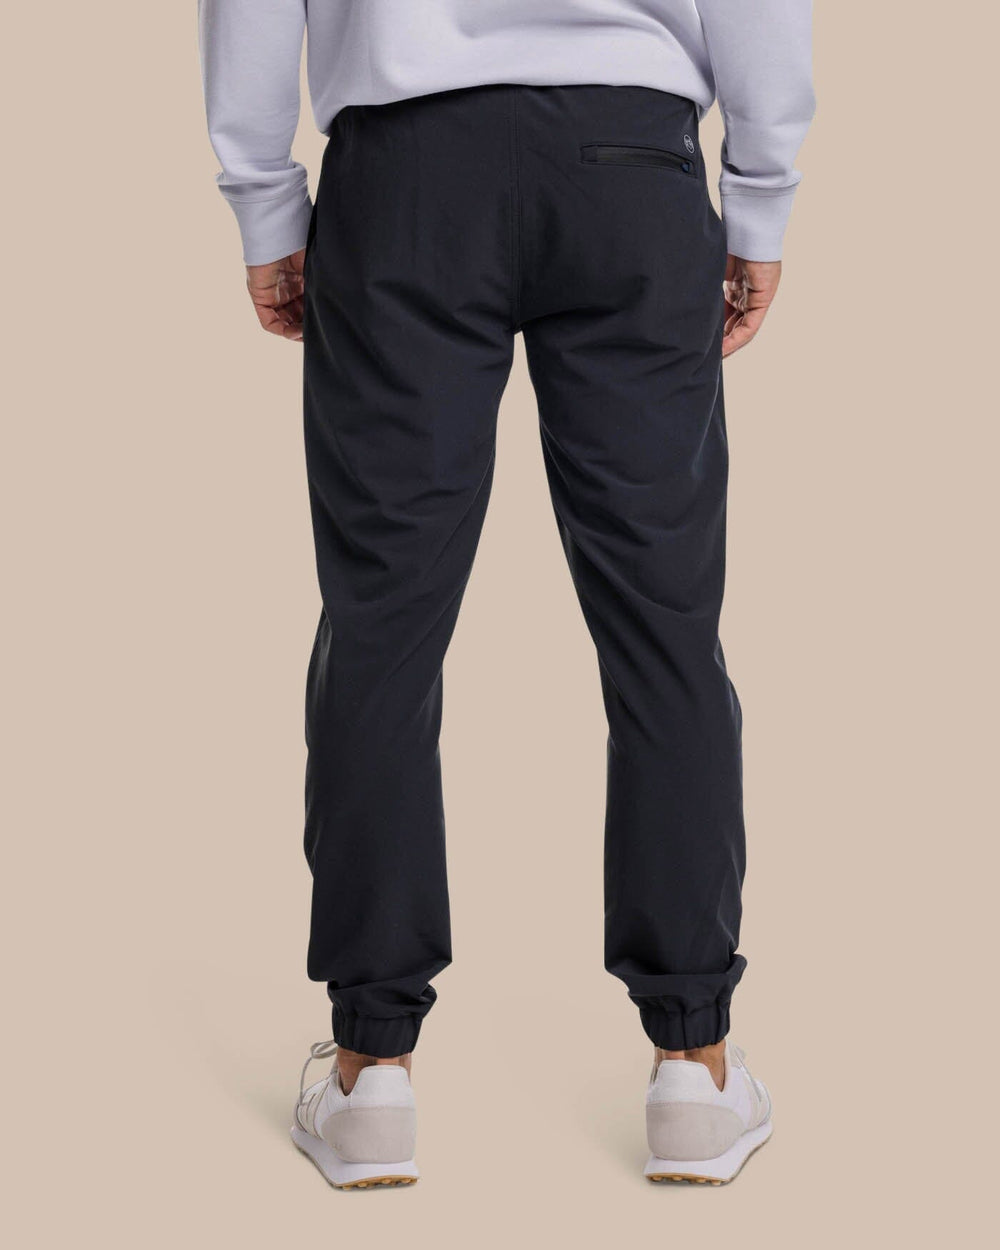 The back view of the Southern Tide The Excursion Performance Jogger by Southern Tide - Caviar Black